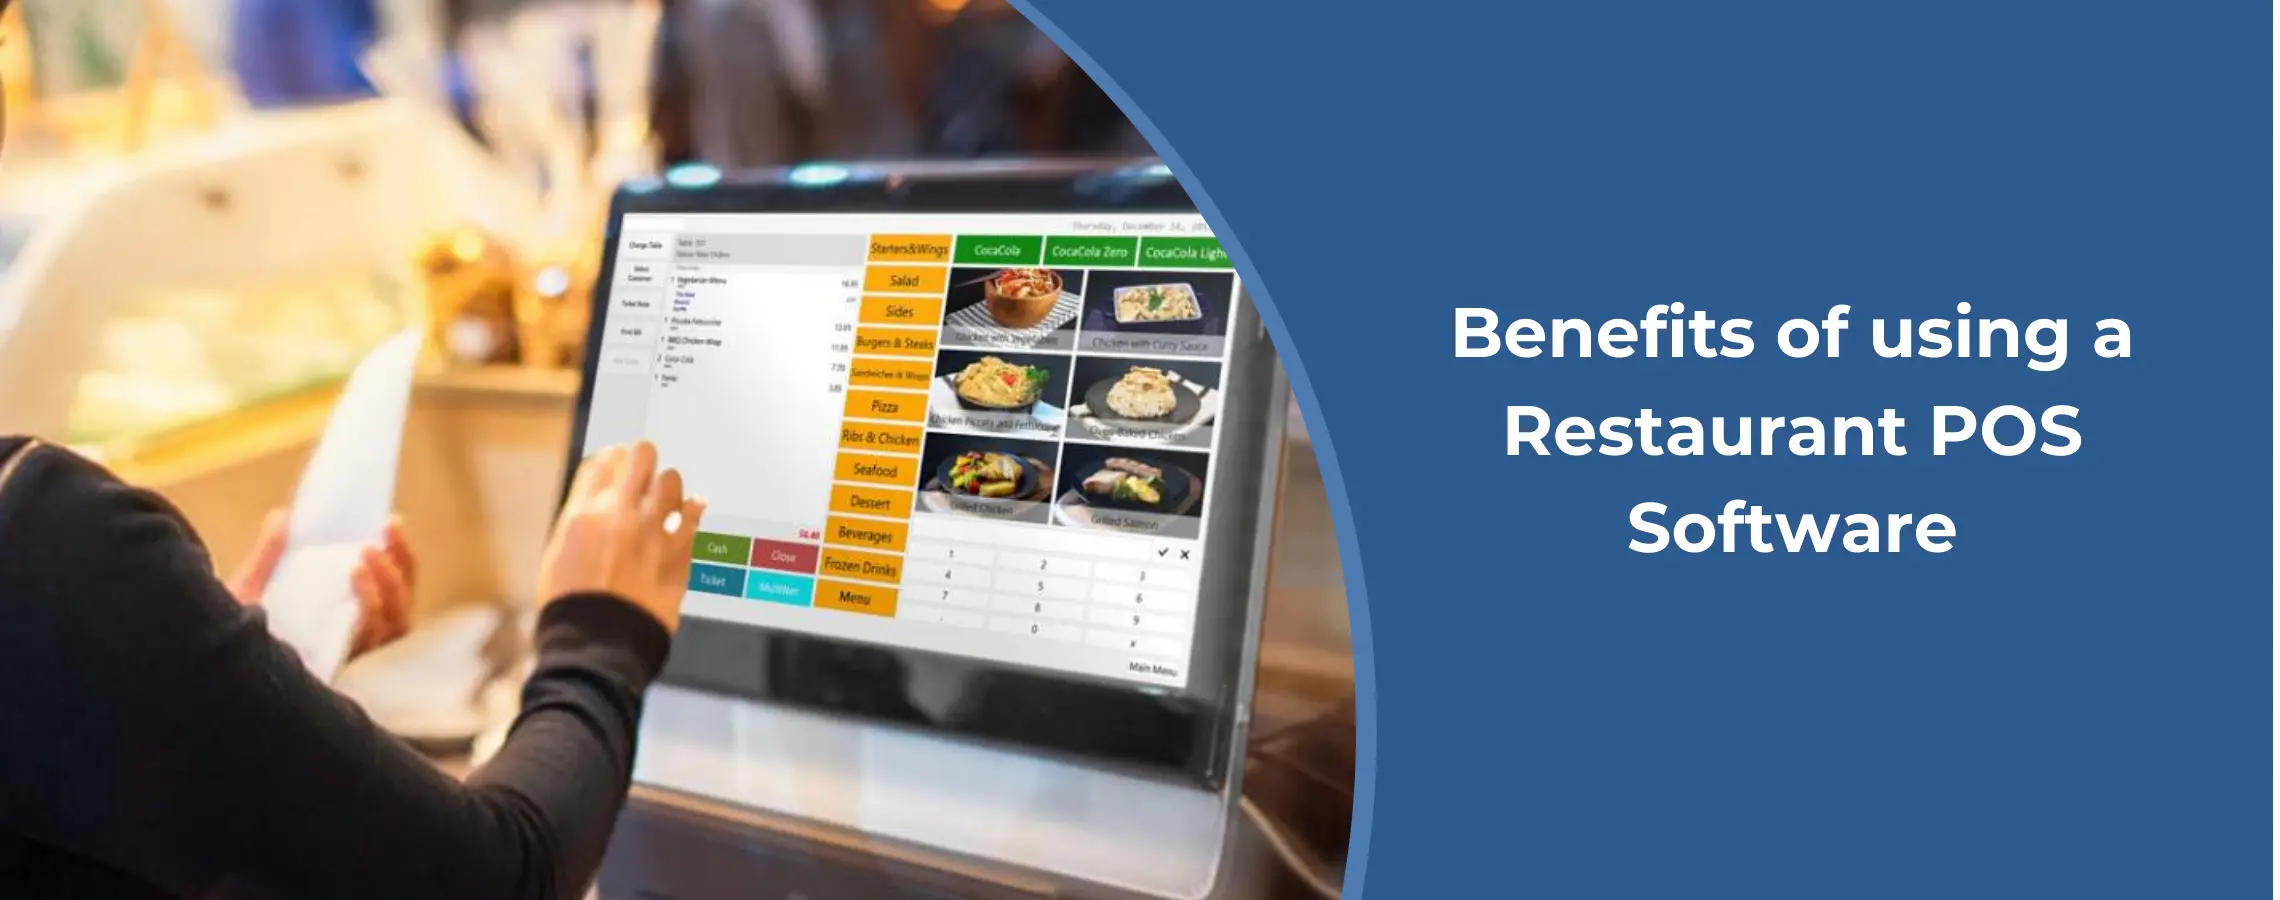 Benefits of using a Restaurant POS Software